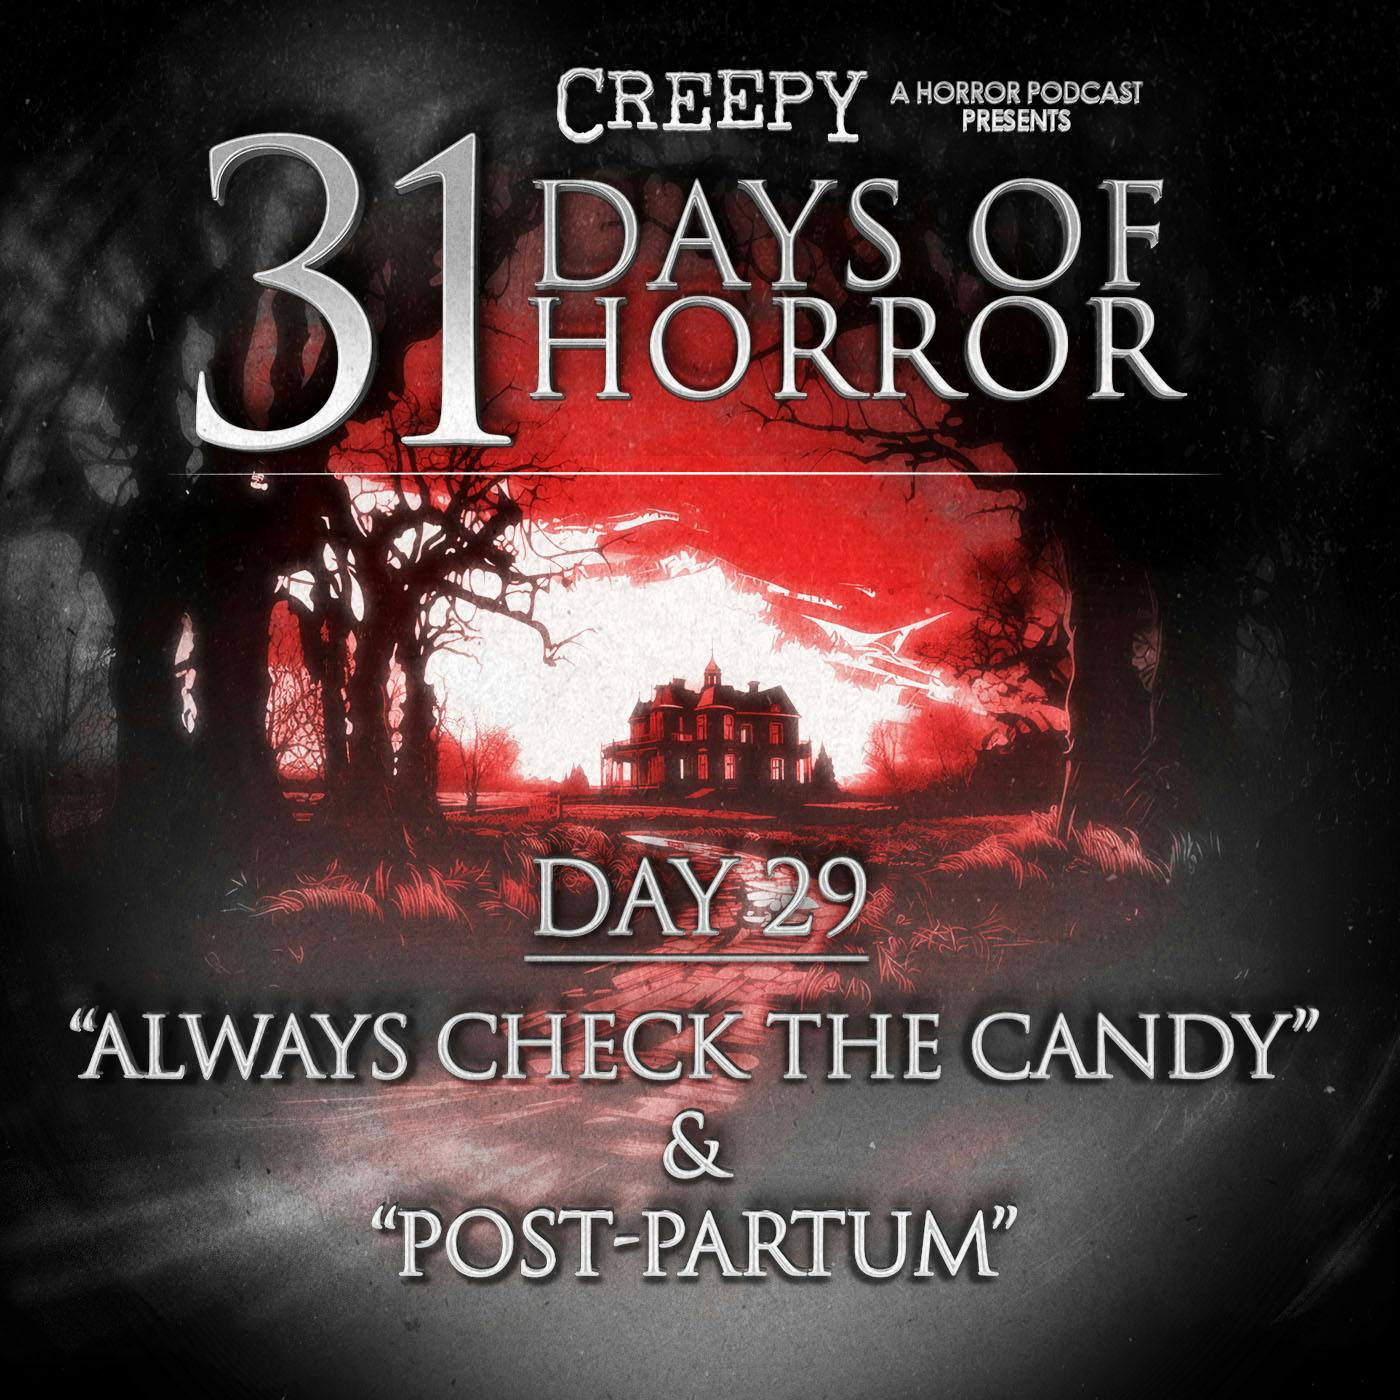 Day 29 - Always Check the Candy & Post Pardum